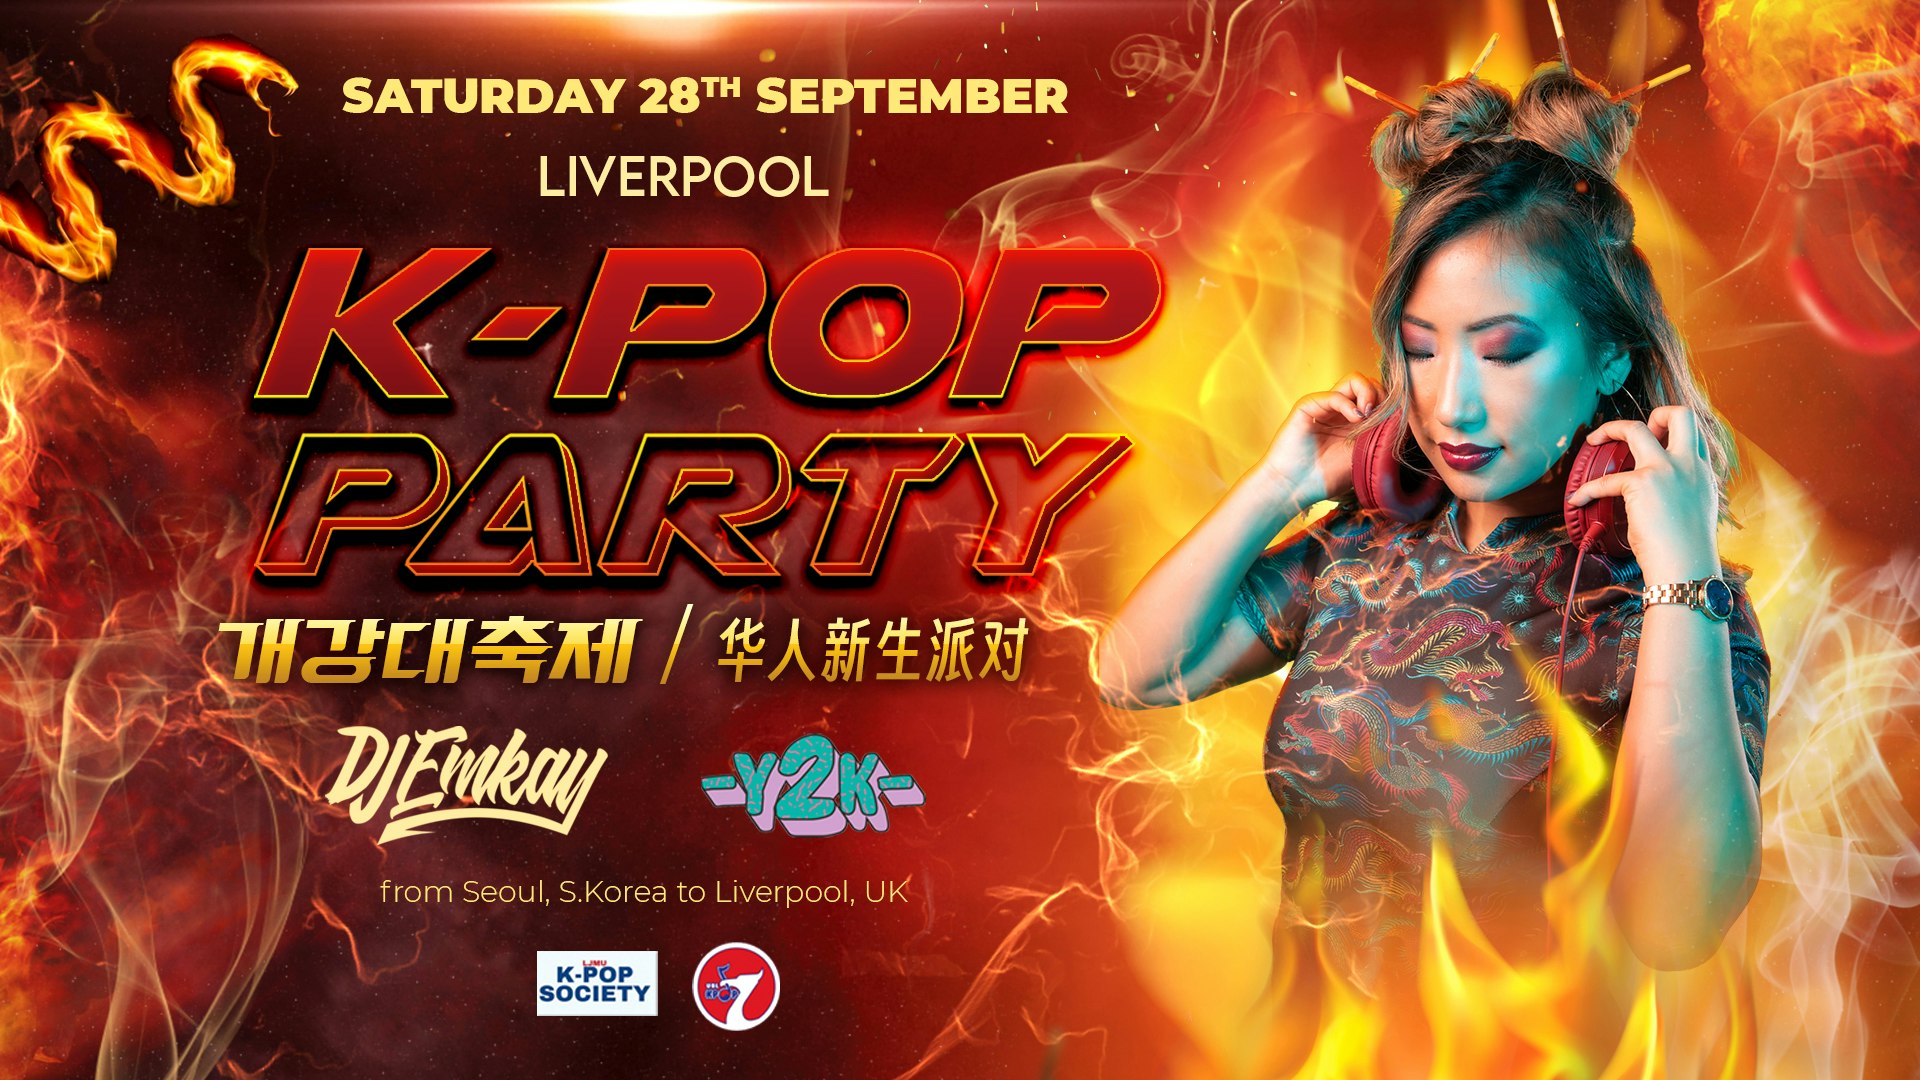 Liverpool K-Pop Party – Fire Tour with DJ EMKAY | Saturday 28th September